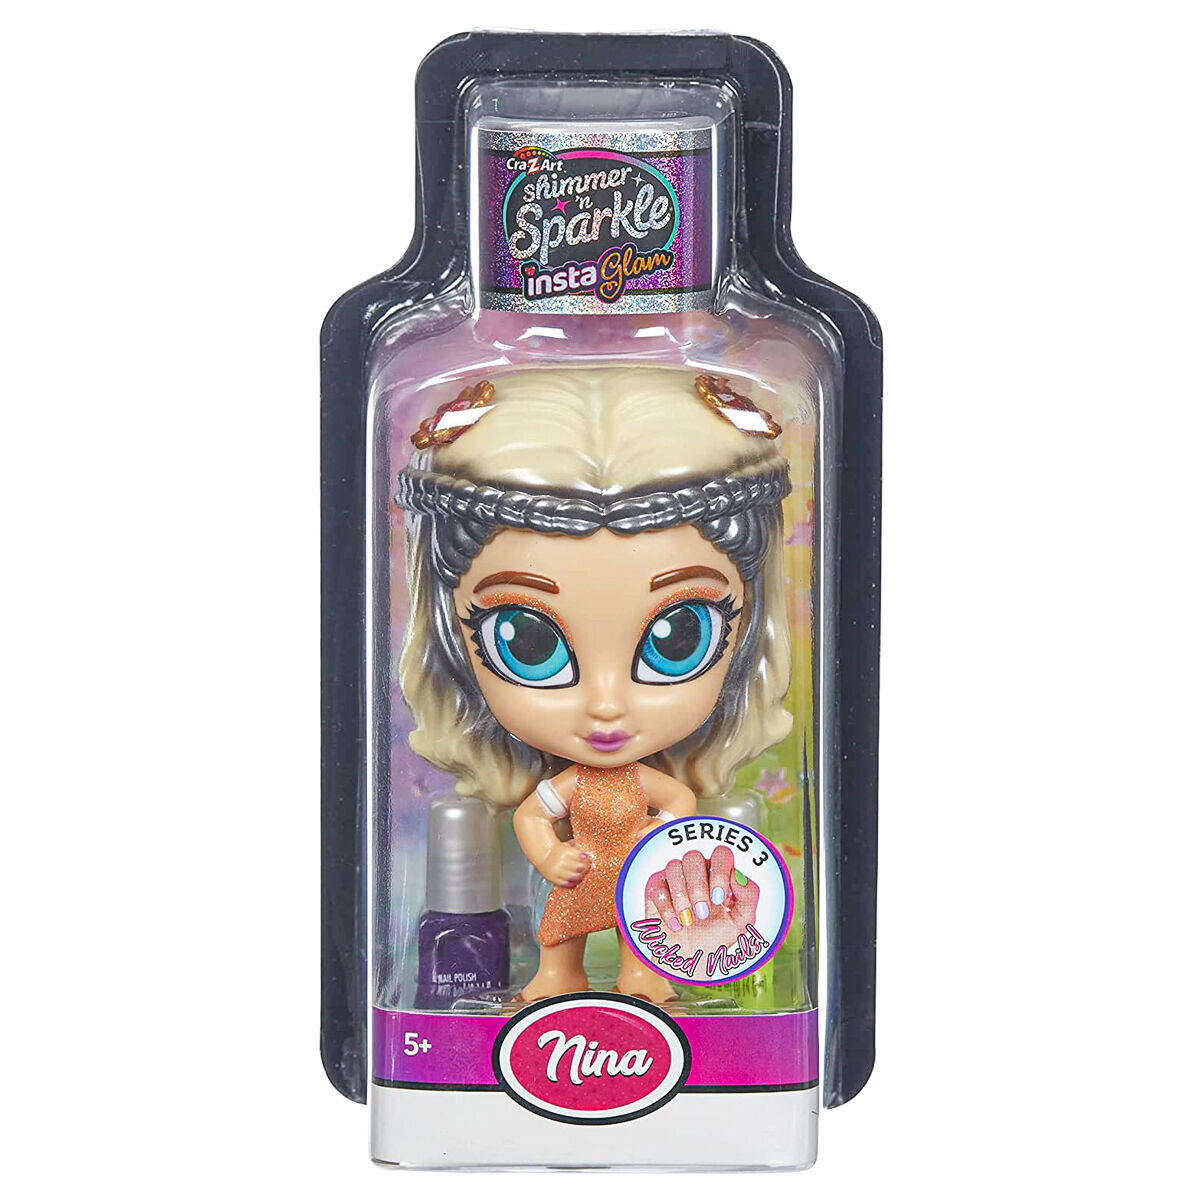 Shimmer and Sparkle InstaGlam Doll - Wicked Nails - Nina (Series 3)